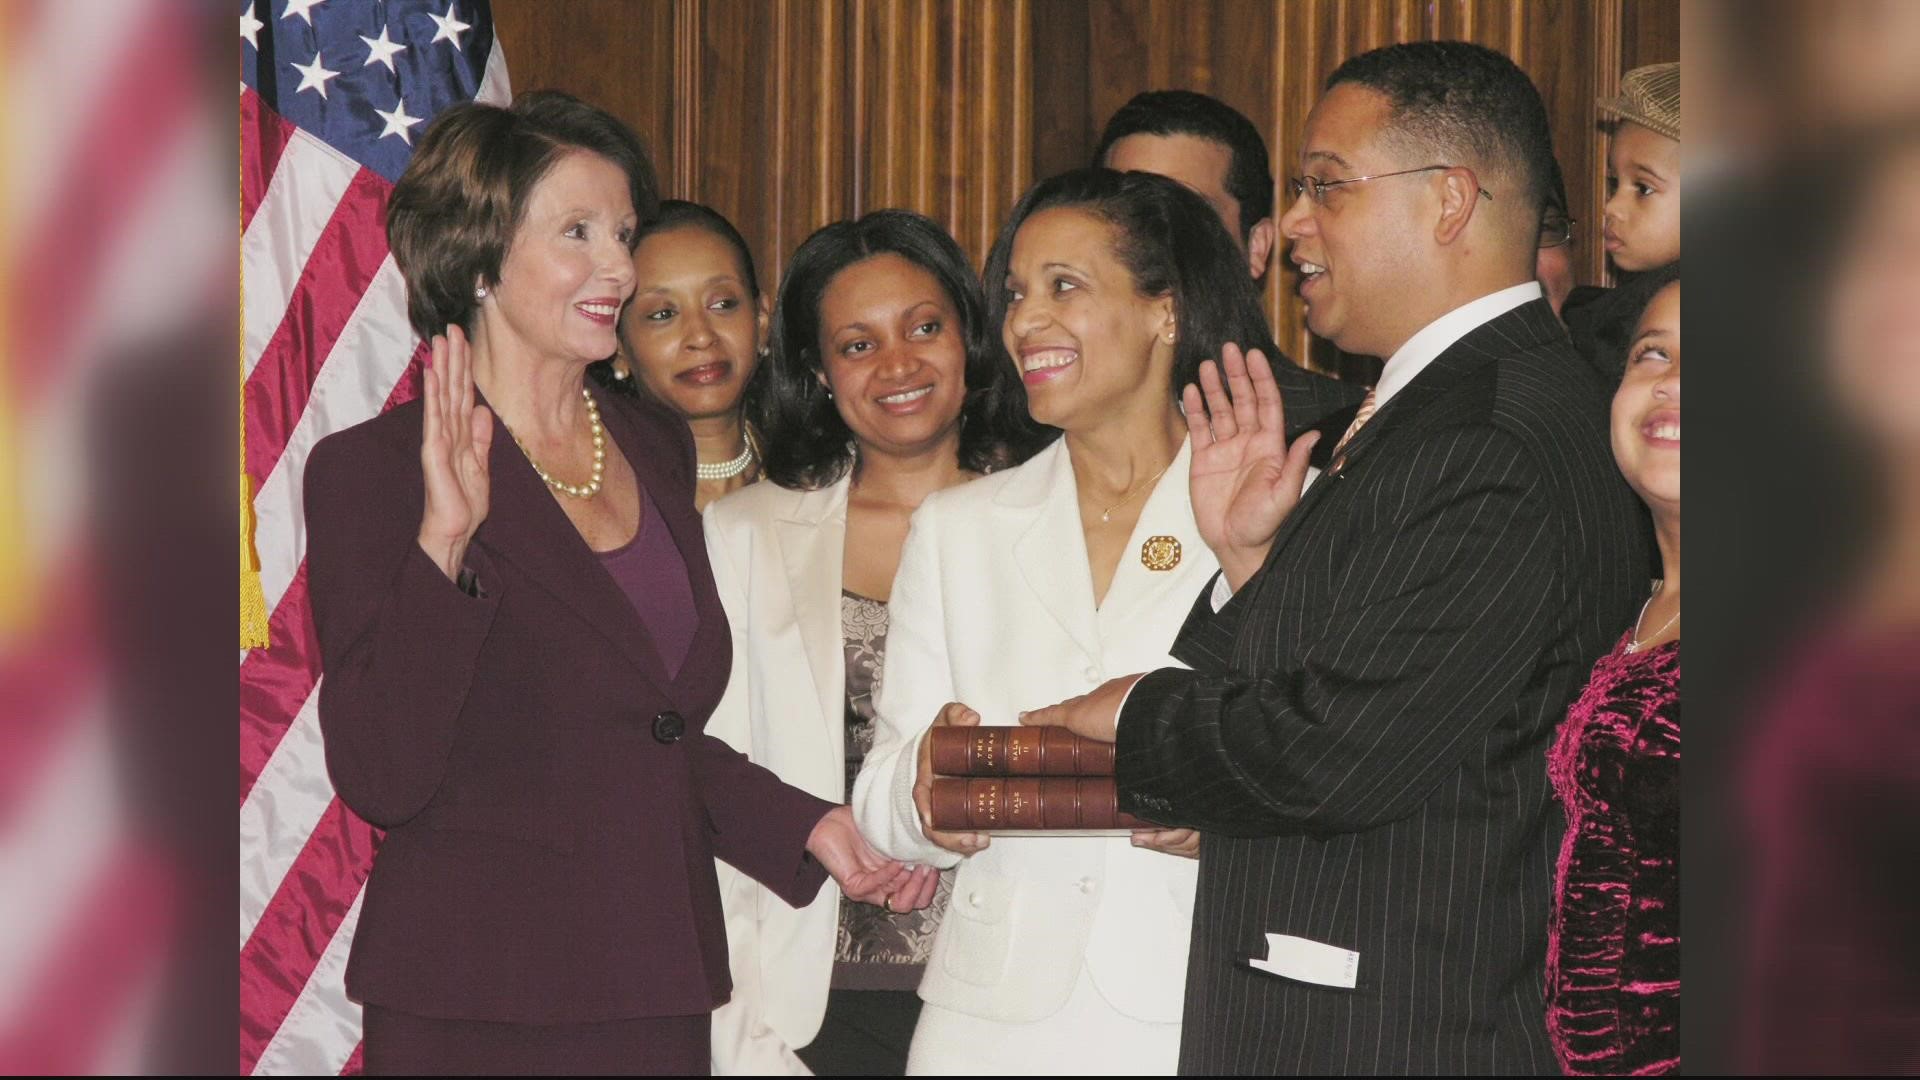 See how a regular swearing in for Speaker of the House is as we look back in recent history.